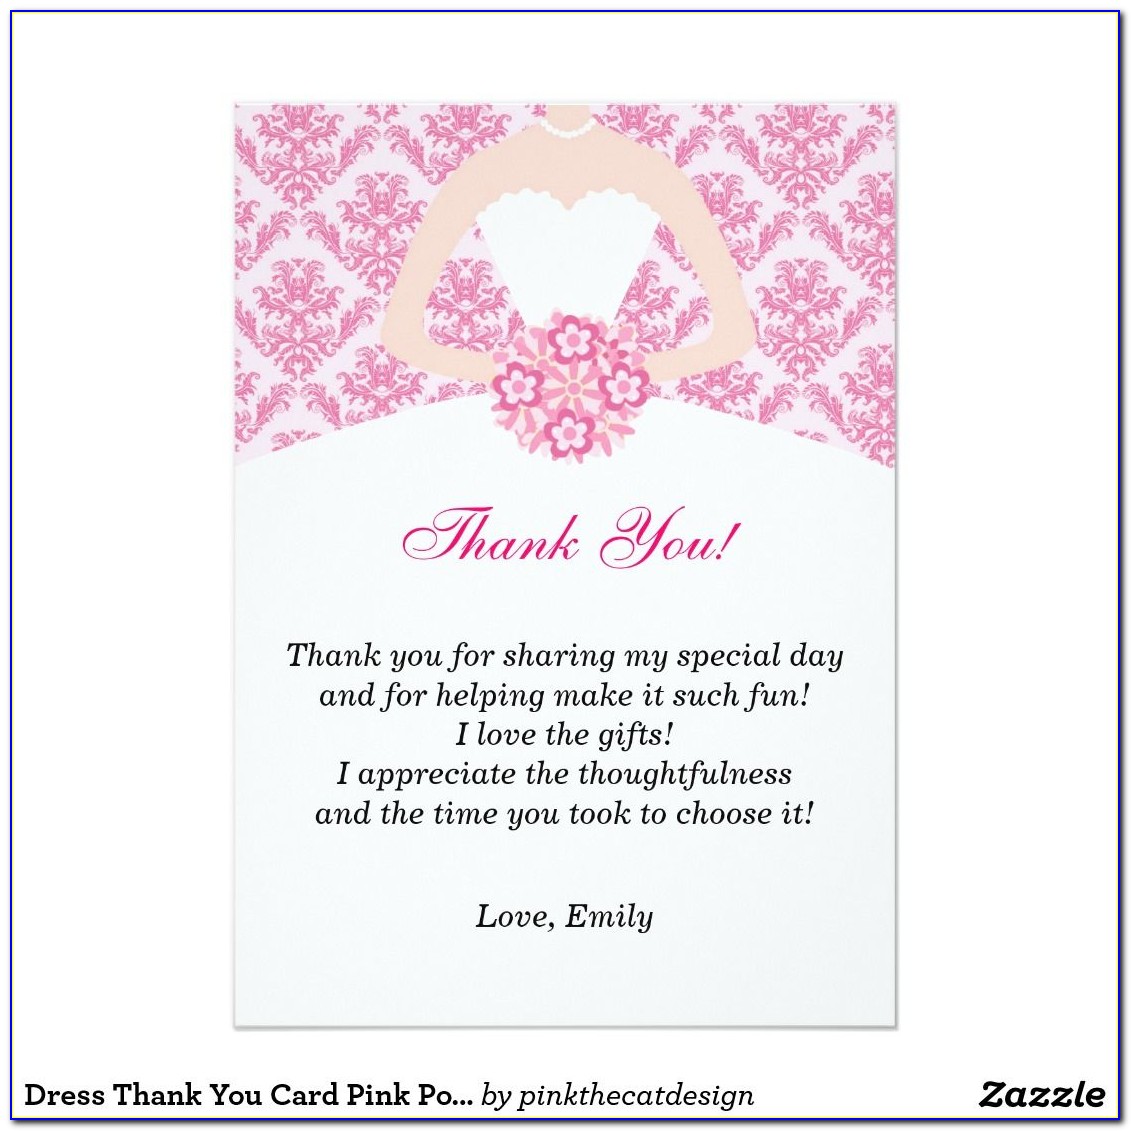 Create Your Own Invitation Card Free